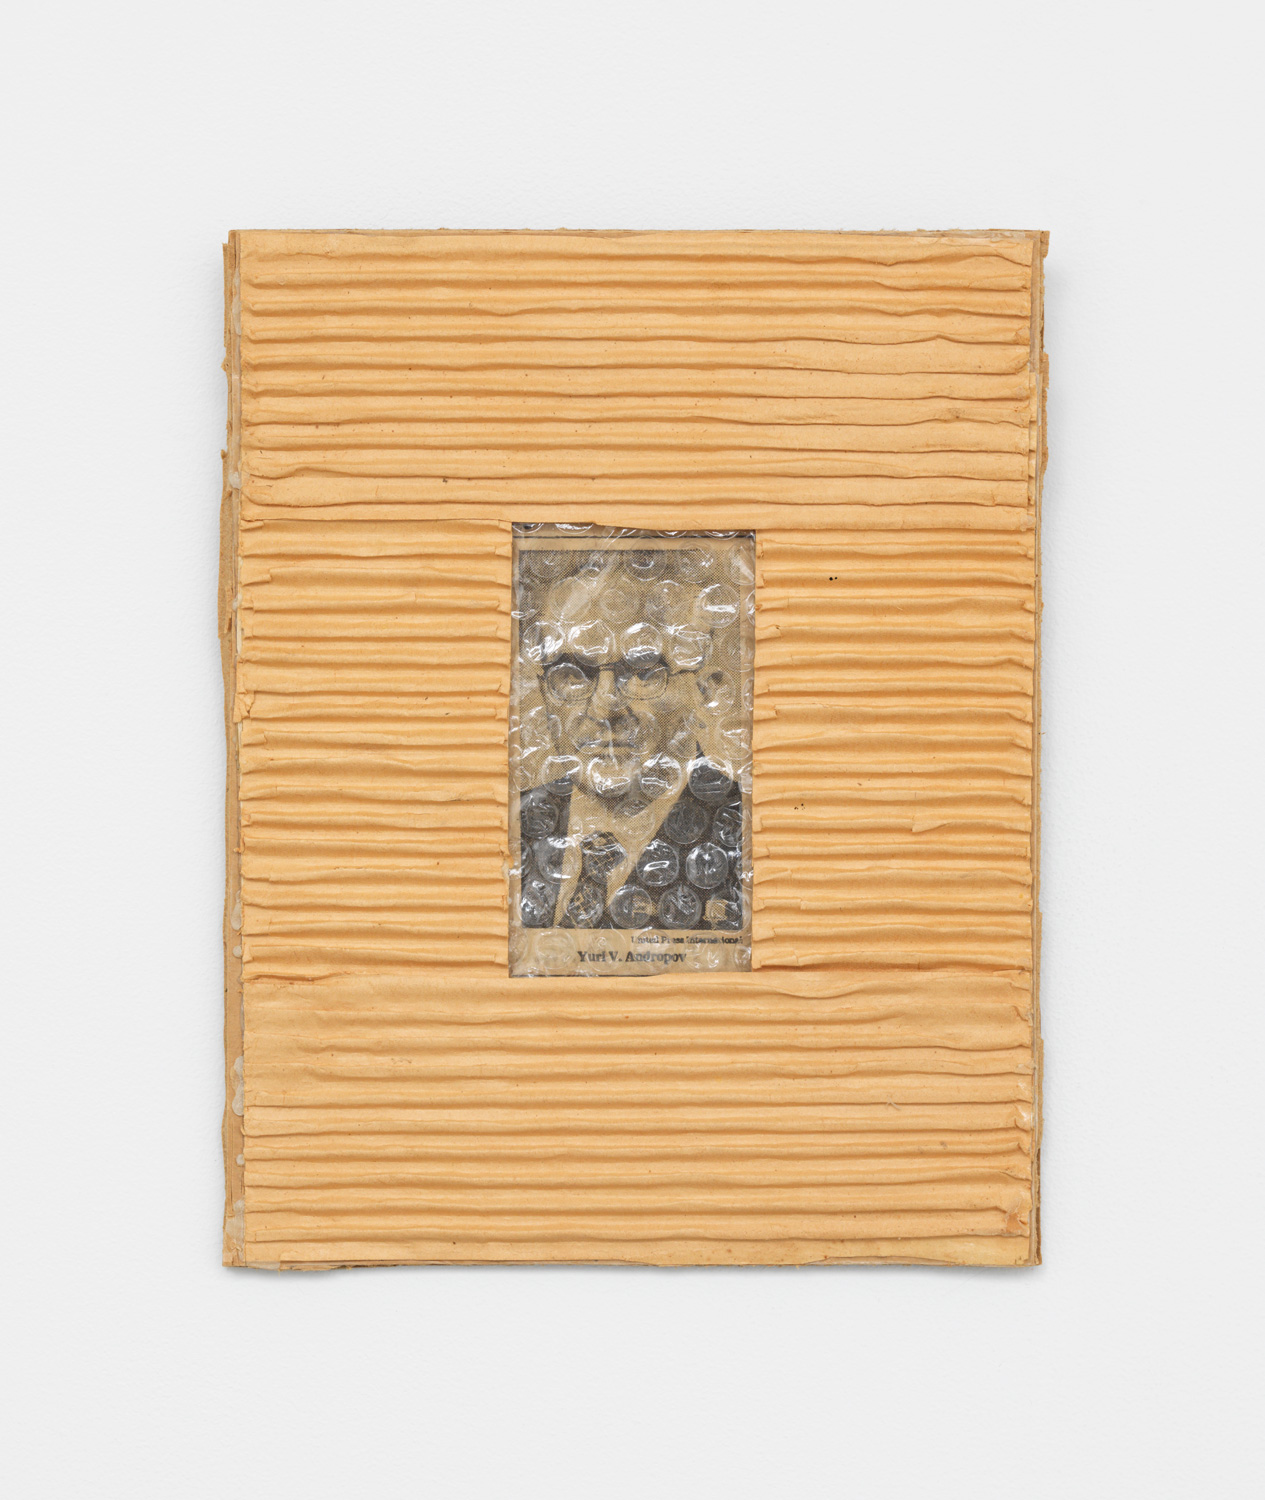 Peter Nagy, Yuri V. Andropov, 1983, corrugated cardboard, bubble wrap and newspaper clipping, 9h x 7w in.